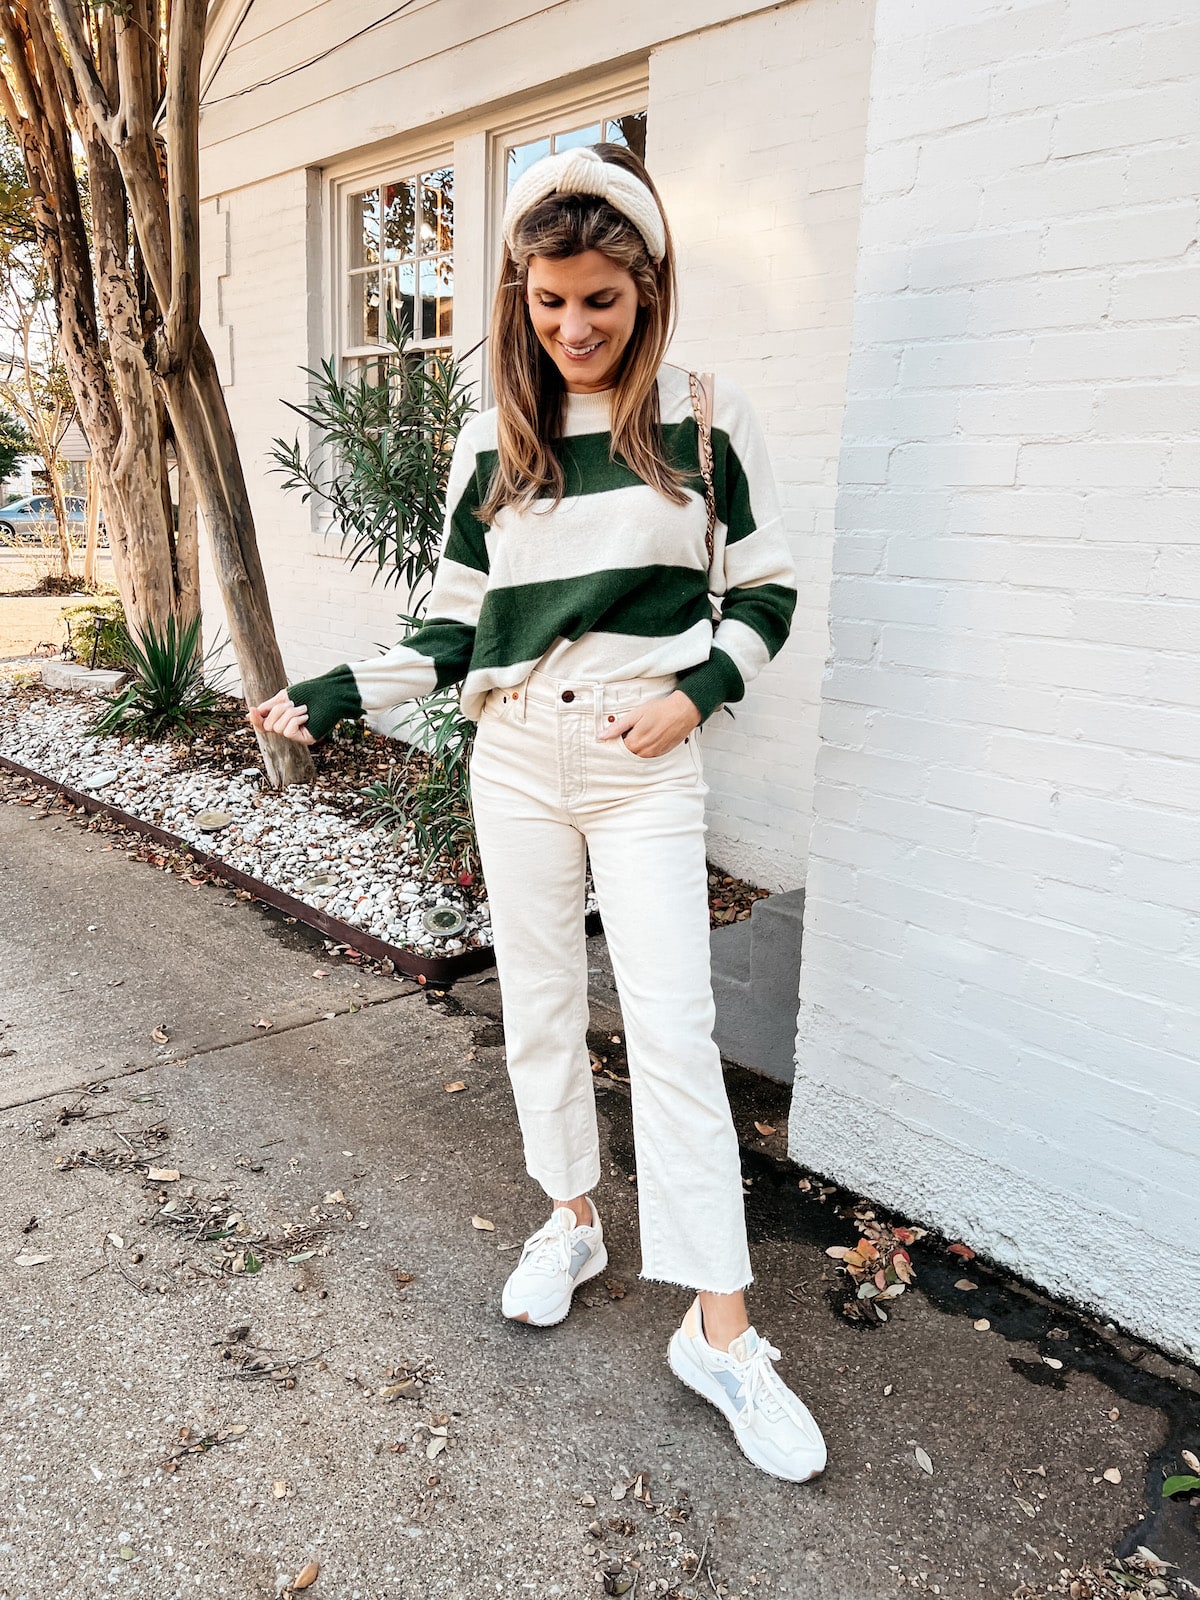 Brighton Butler wearing ParrishLA striped sweater with cream madewell jeans and new balance sneakers